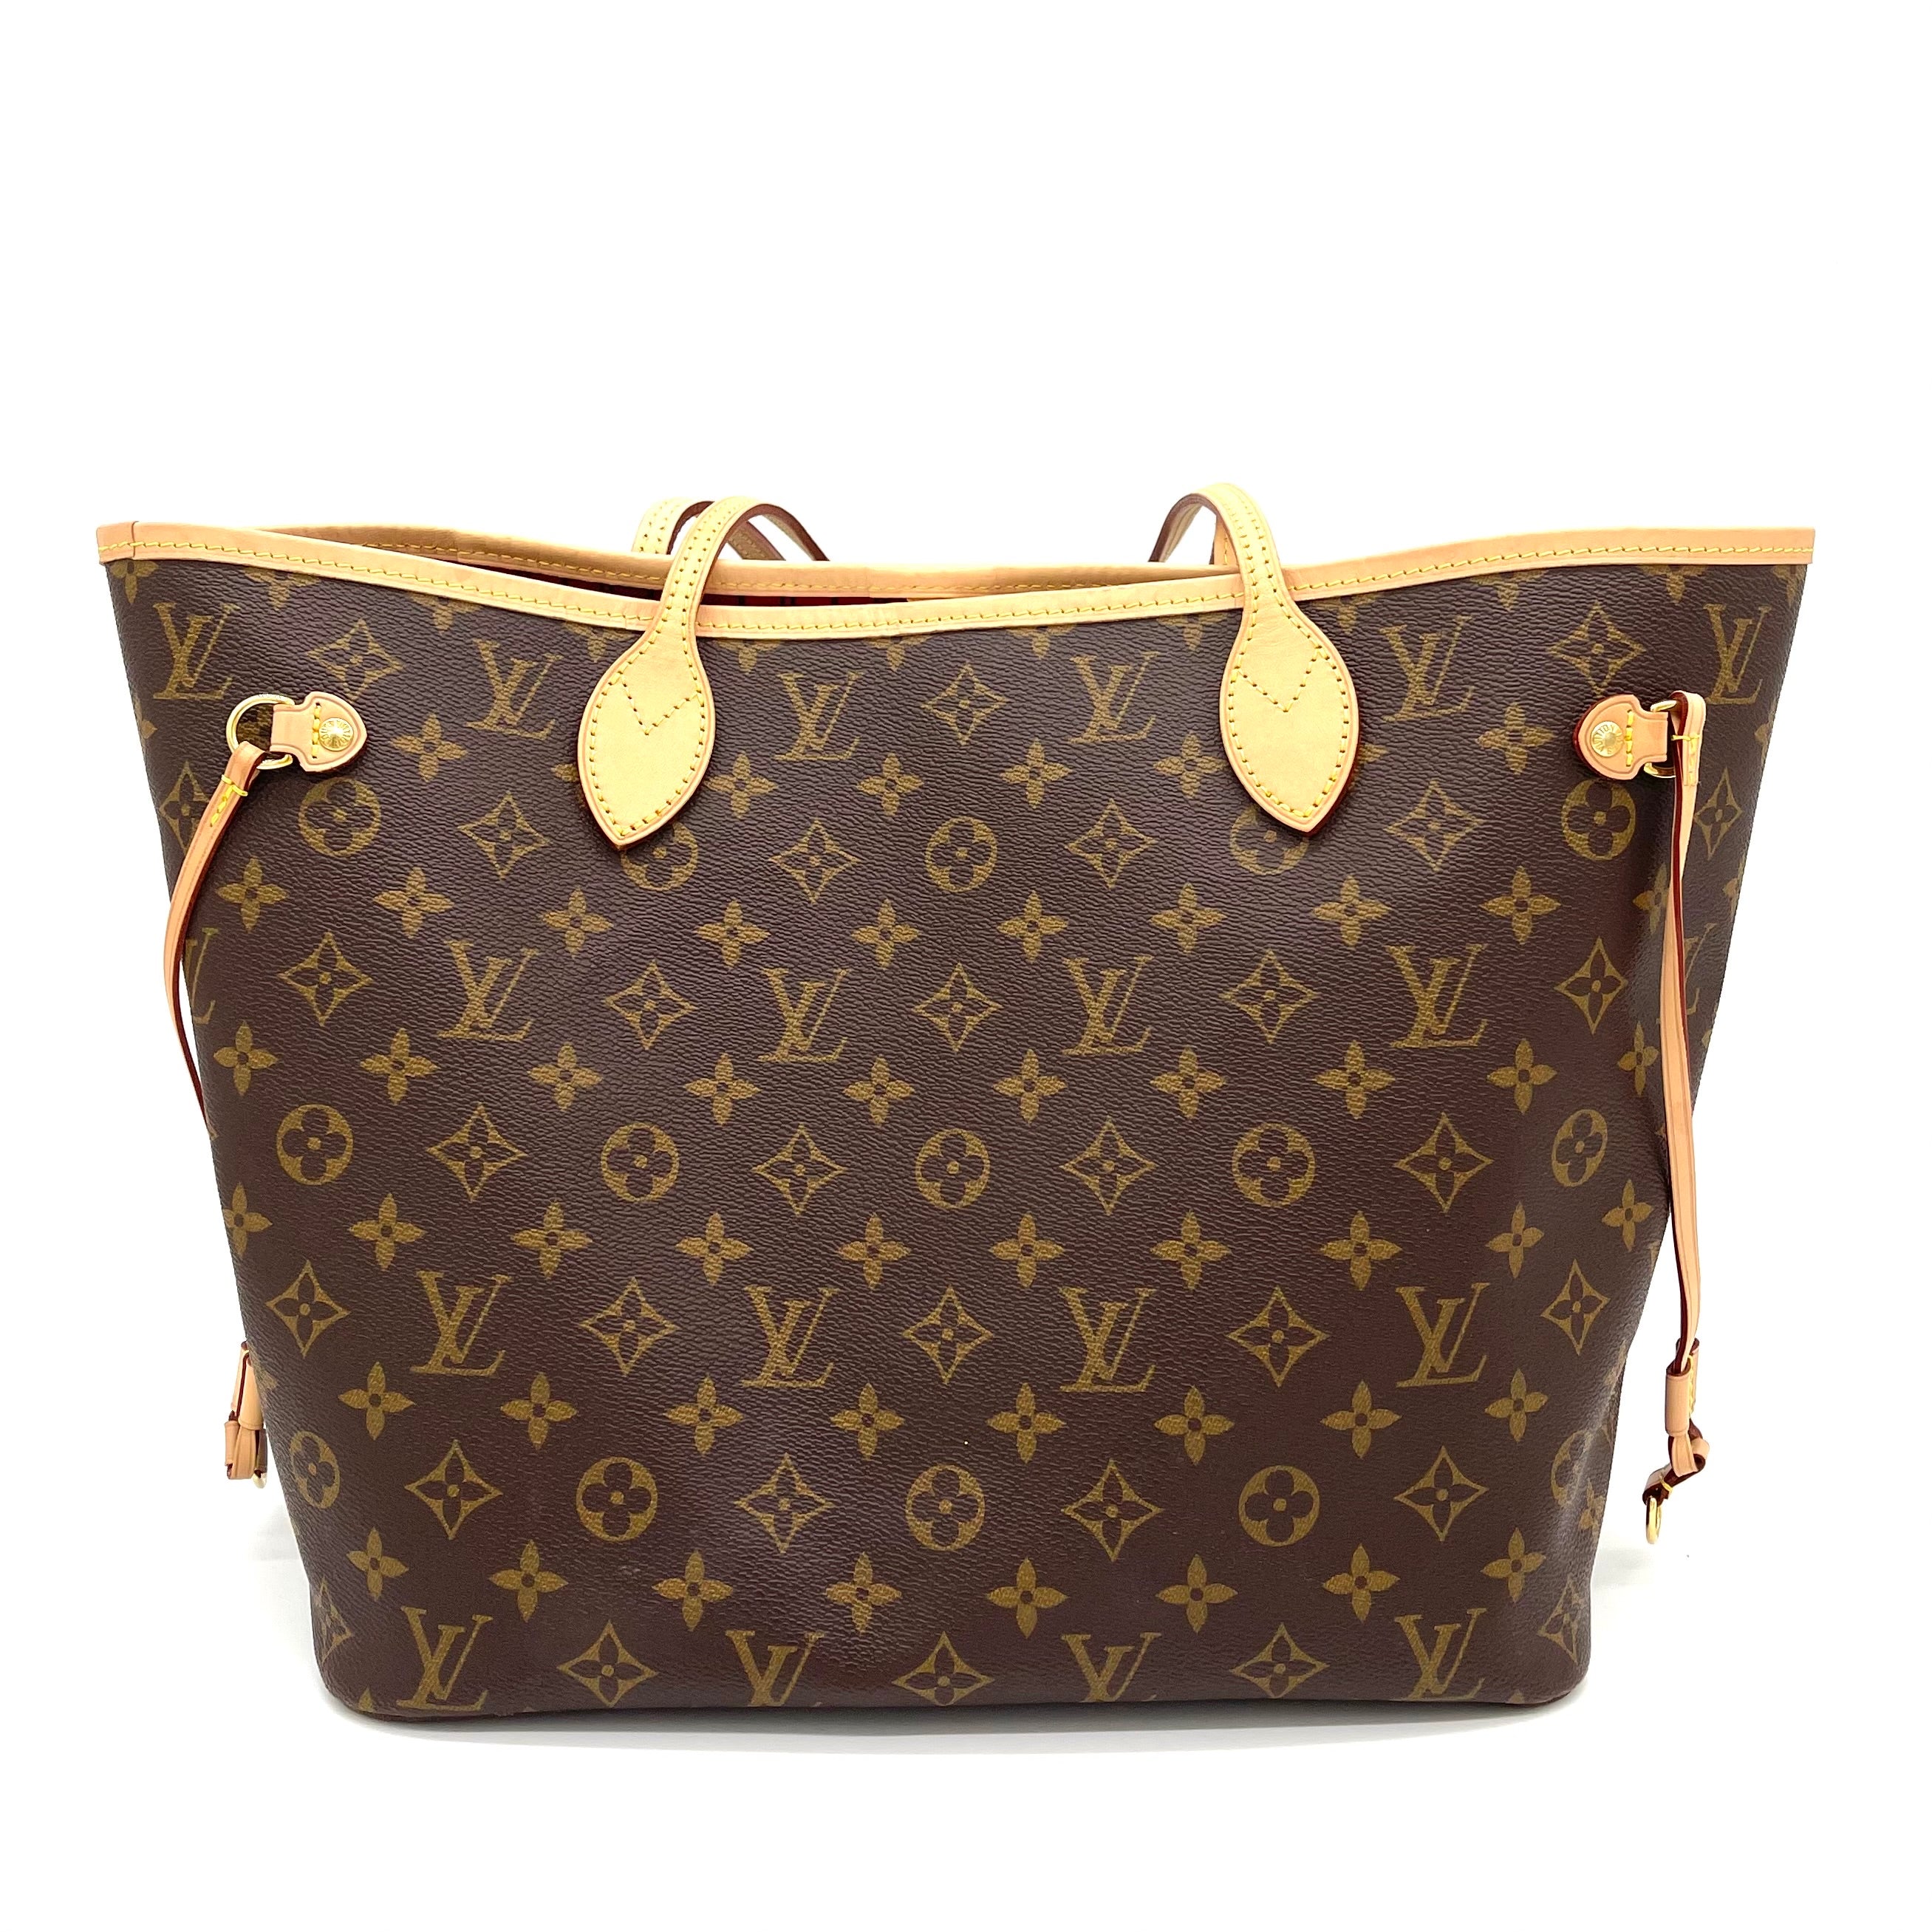 Neverfull MM with external strap attached?!?